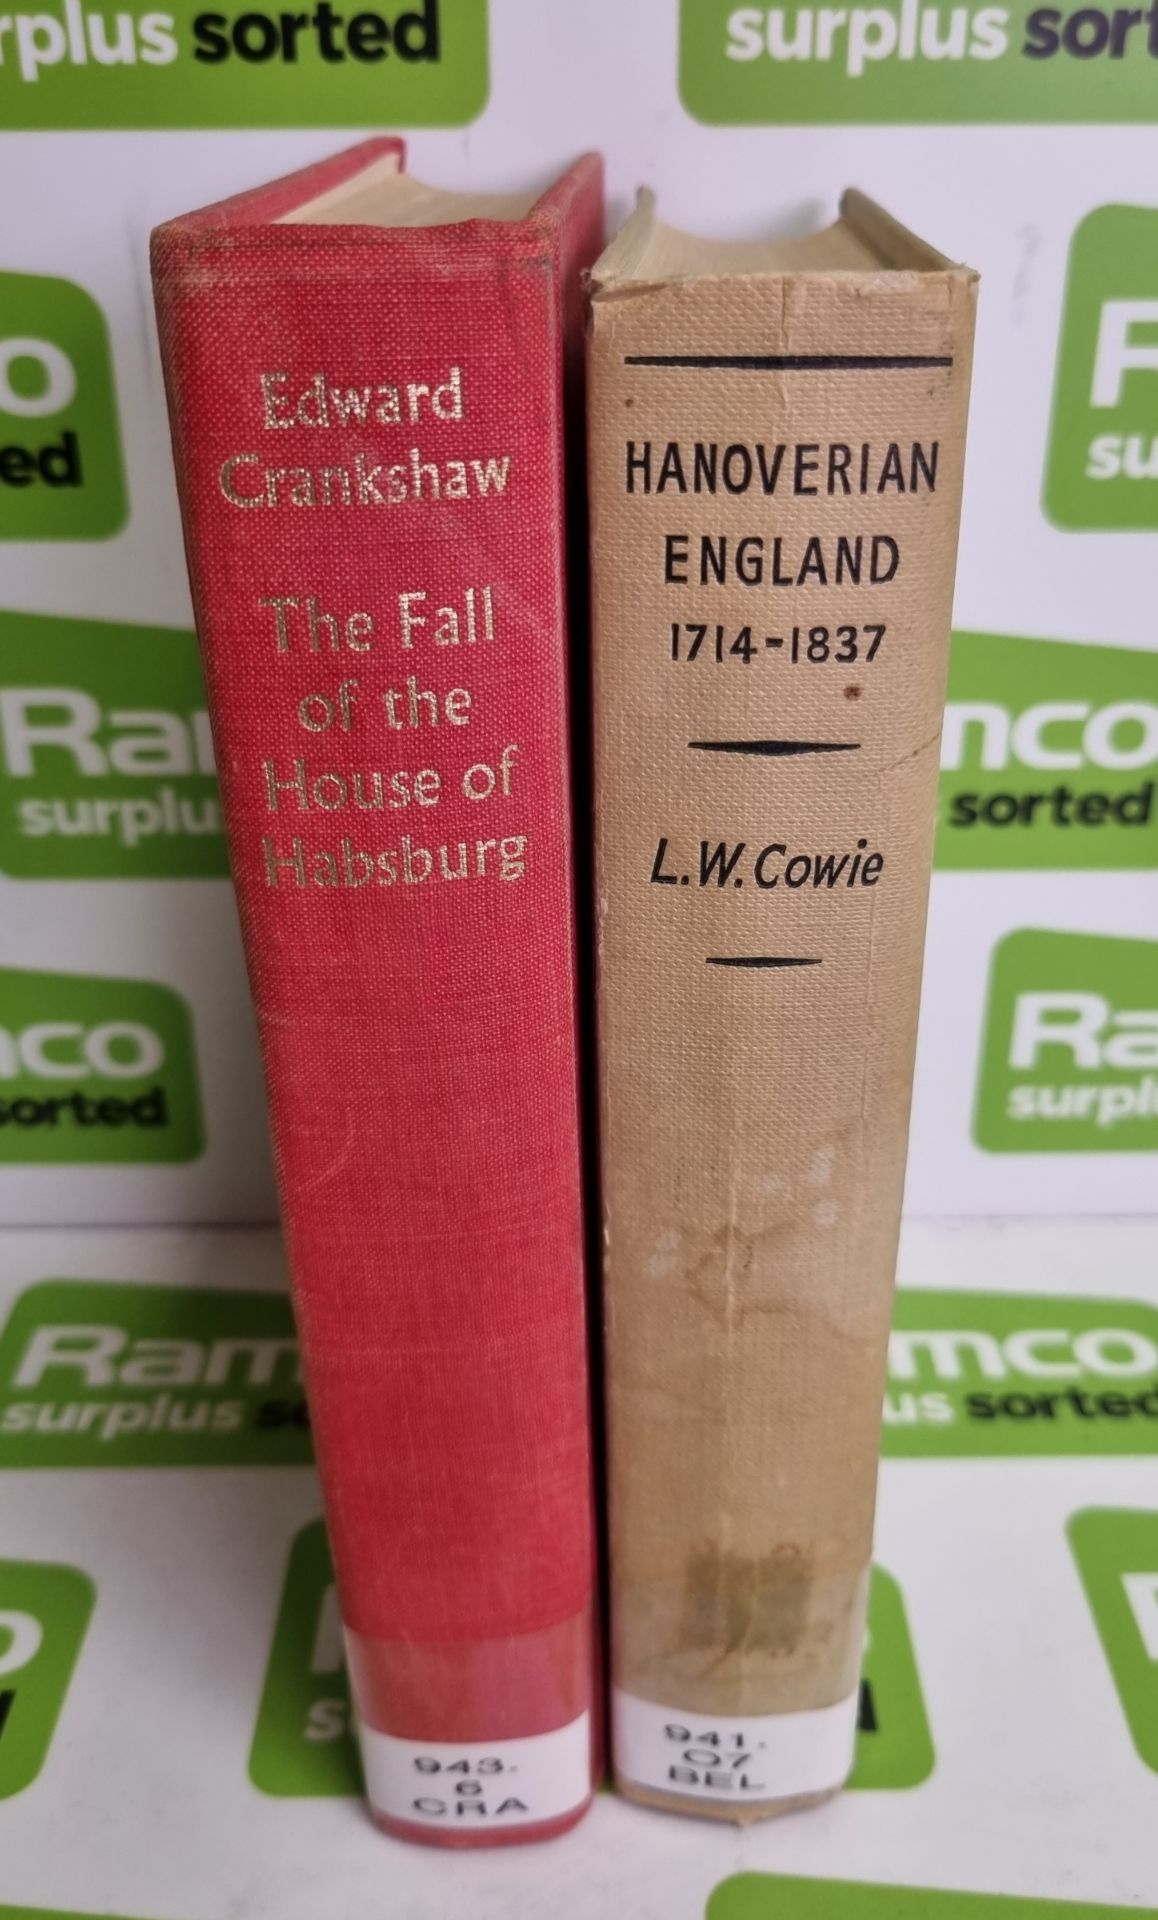 Hanoverian England 1714-1837 : L.W.Cowie - London 1967, The Fall of the House of Habsburg : Edward - Image 2 of 8